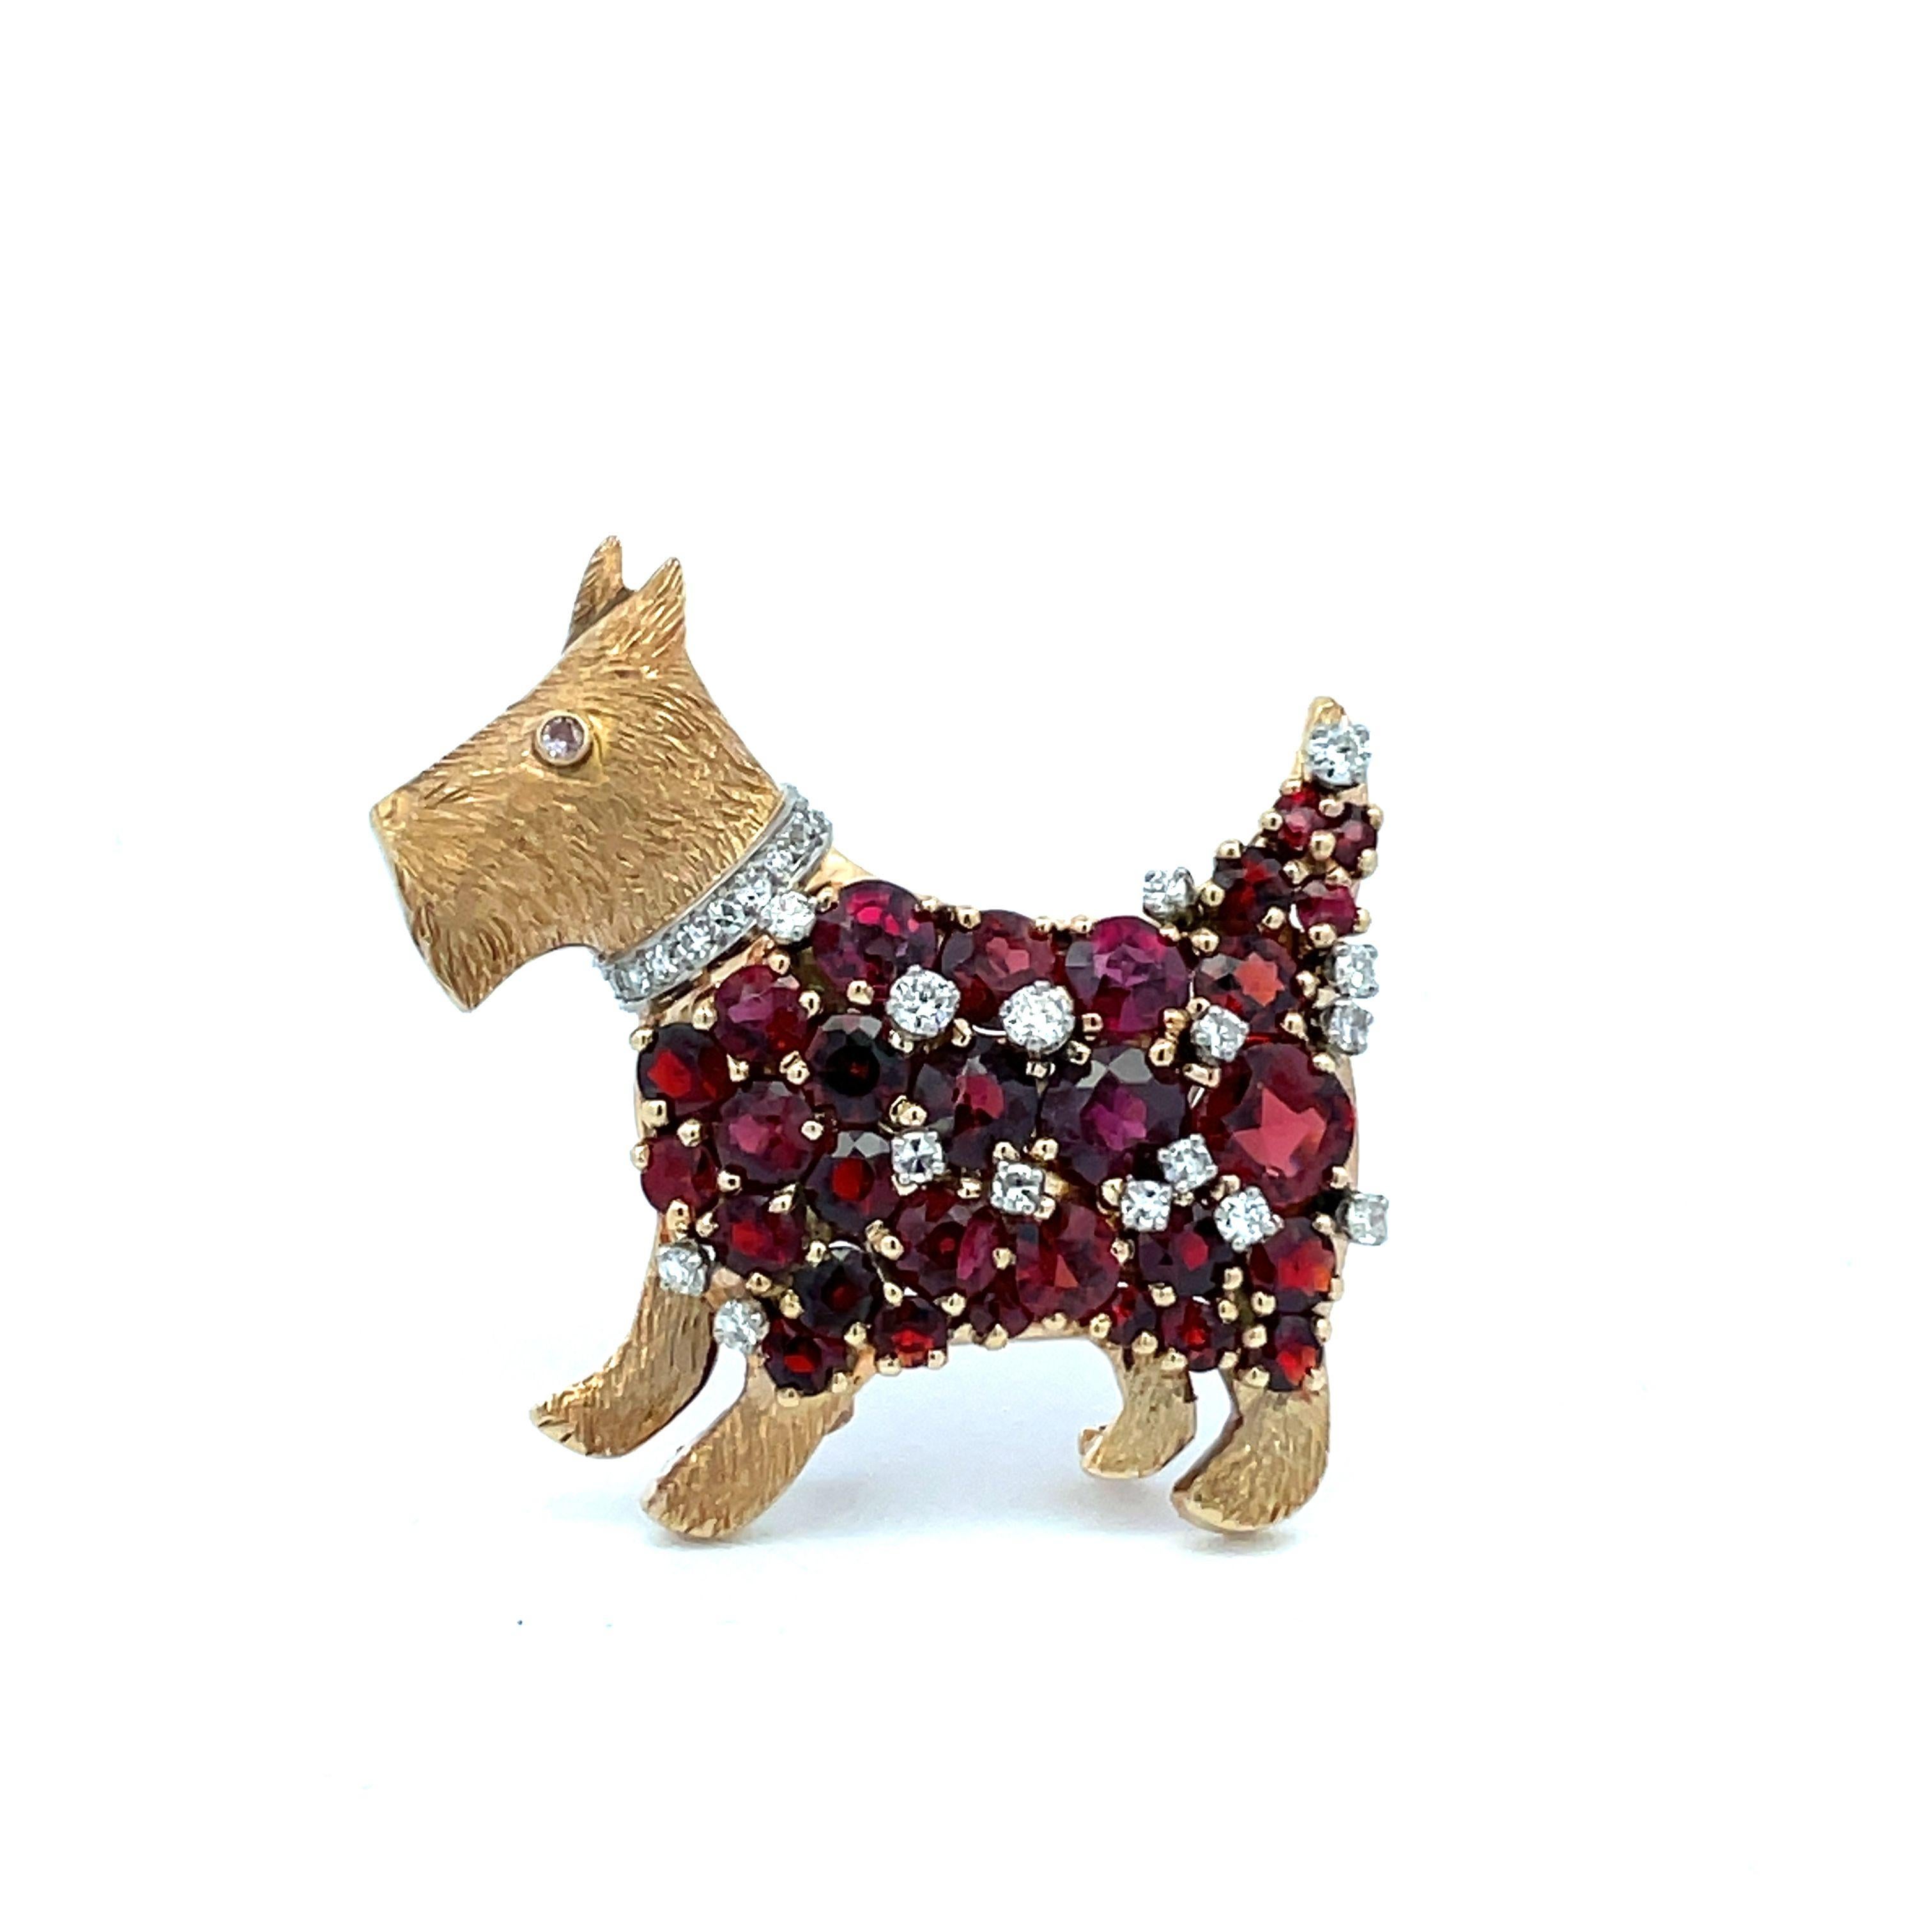 Our terrier is naturally adorable with his diamond collar and eye, and festive in a garnet and diamond coat. The little fellow measures 1-1/2″ x 1-1/2″ with double pin stem clasp and extra jump ring to wear on a chain if desired. In 14K gold, circa